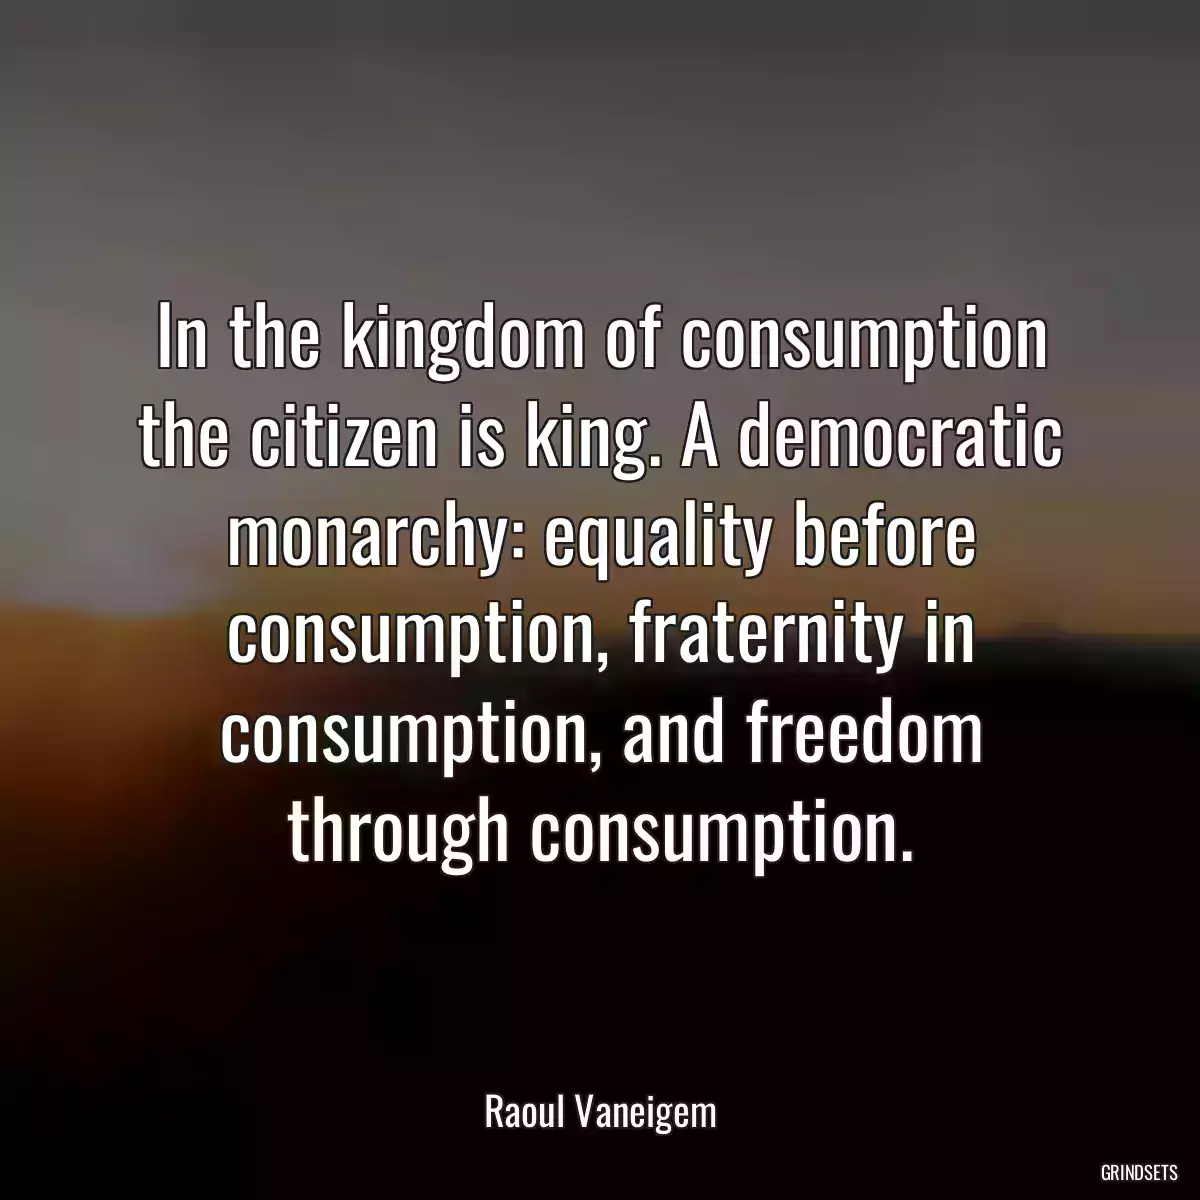 In the kingdom of consumption the citizen is king. A democratic monarchy: equality before consumption, fraternity in consumption, and freedom through consumption.